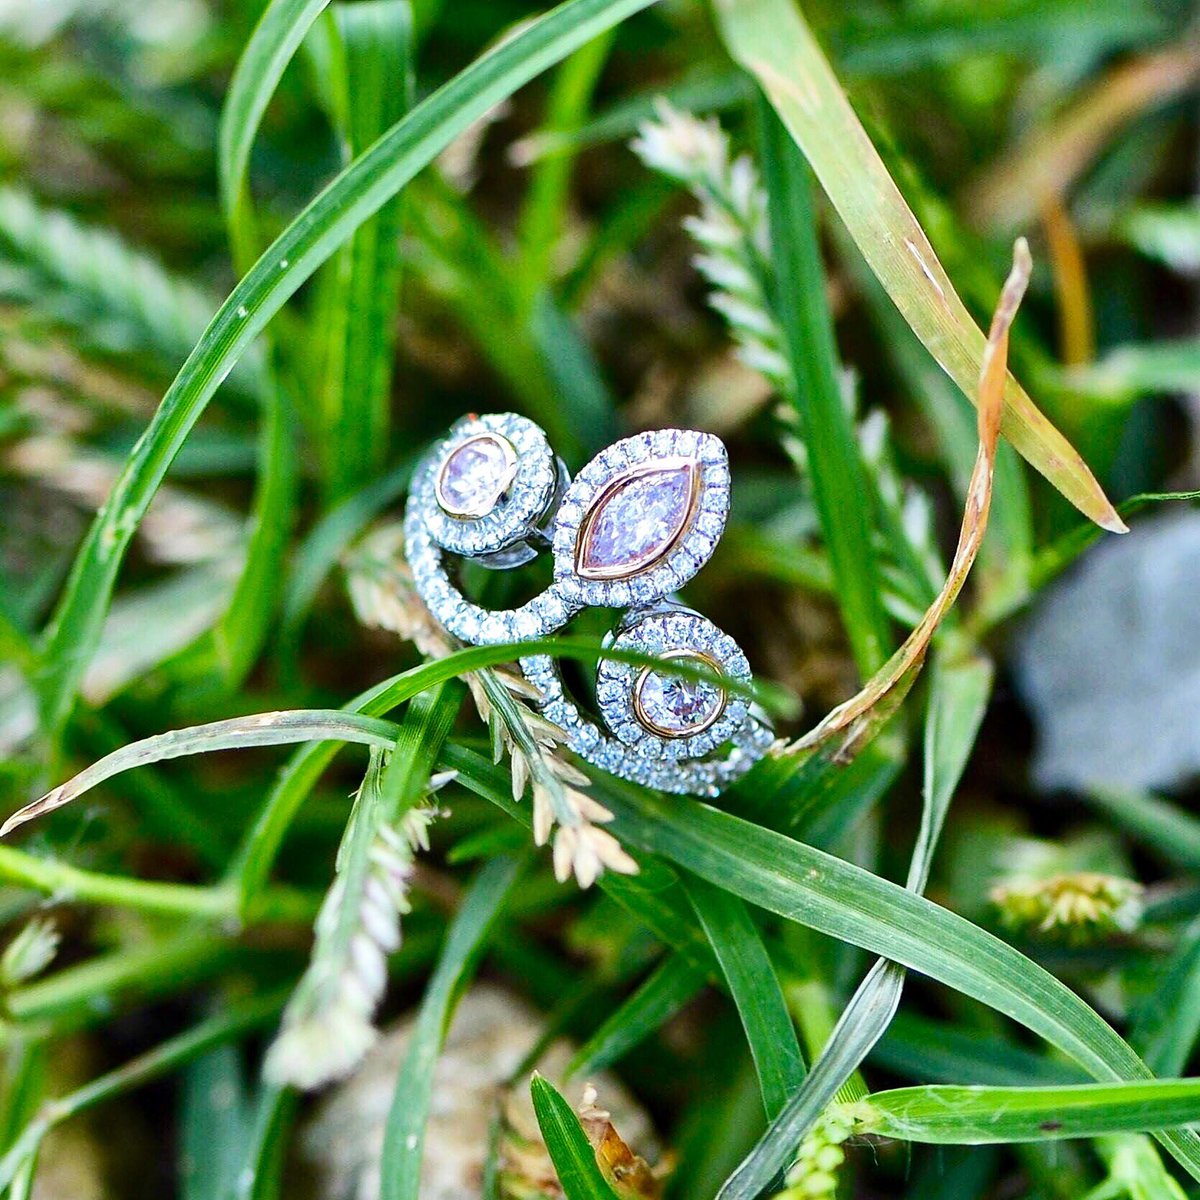 Do you have a princess in your life? She would LOVE a #TiaraRing! This jewelry piece is made from PINK diamonds, and in a delicate setting that looks like a miniature tiara on the finger, this would make a great right hand ring or even engagement ring 😍 #SanDiegoJeweler